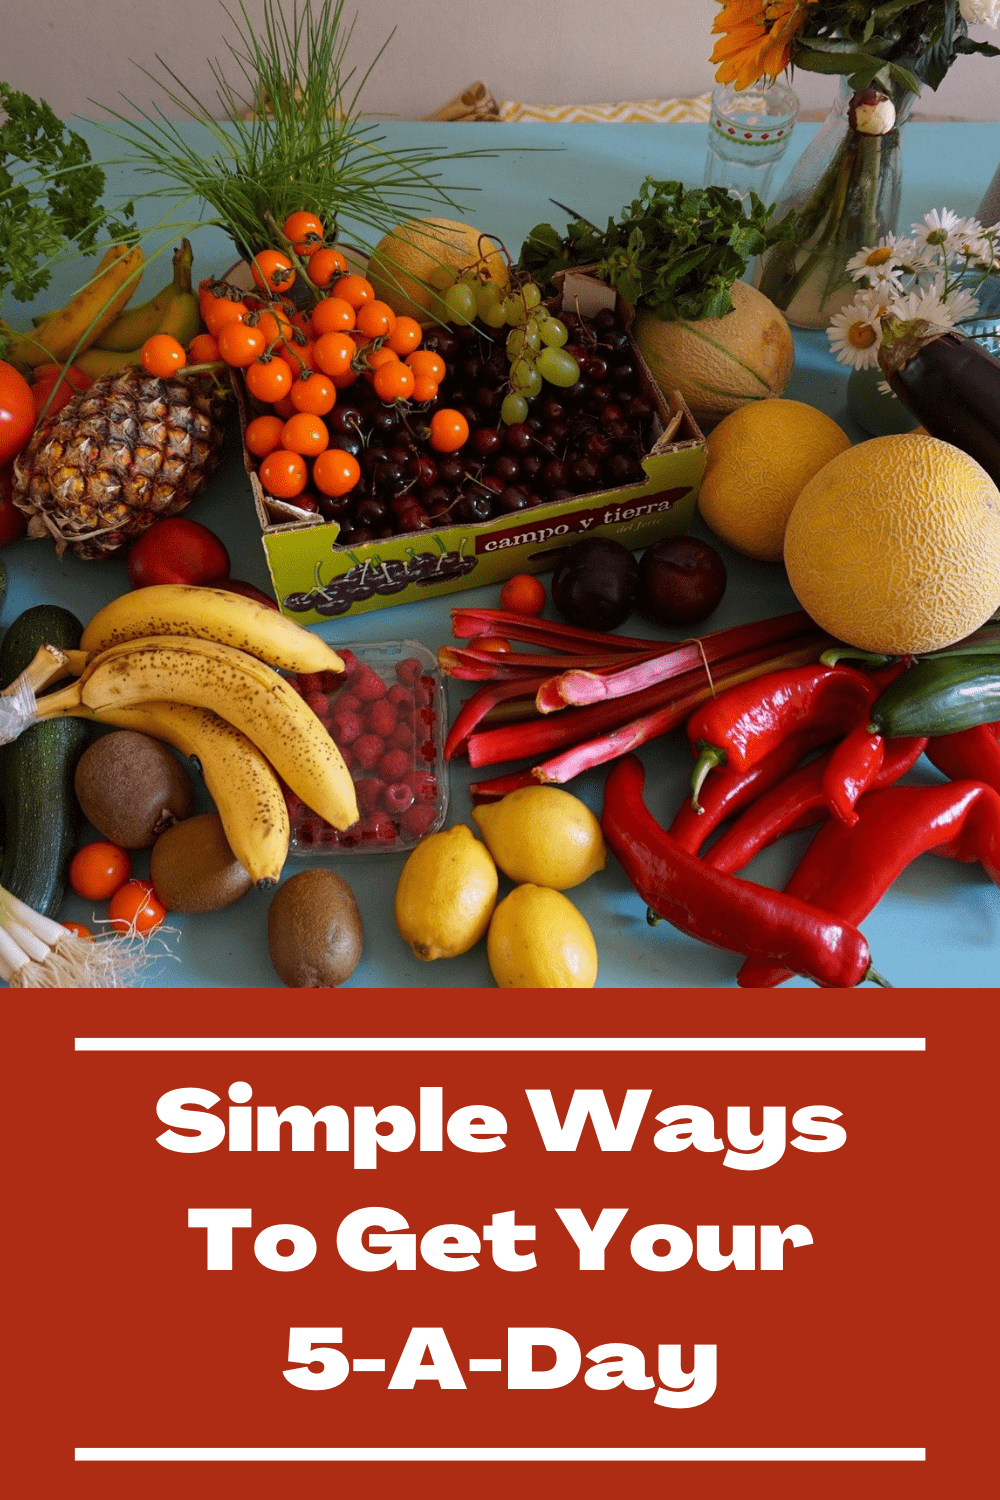 simple ways to get your 5-a-day